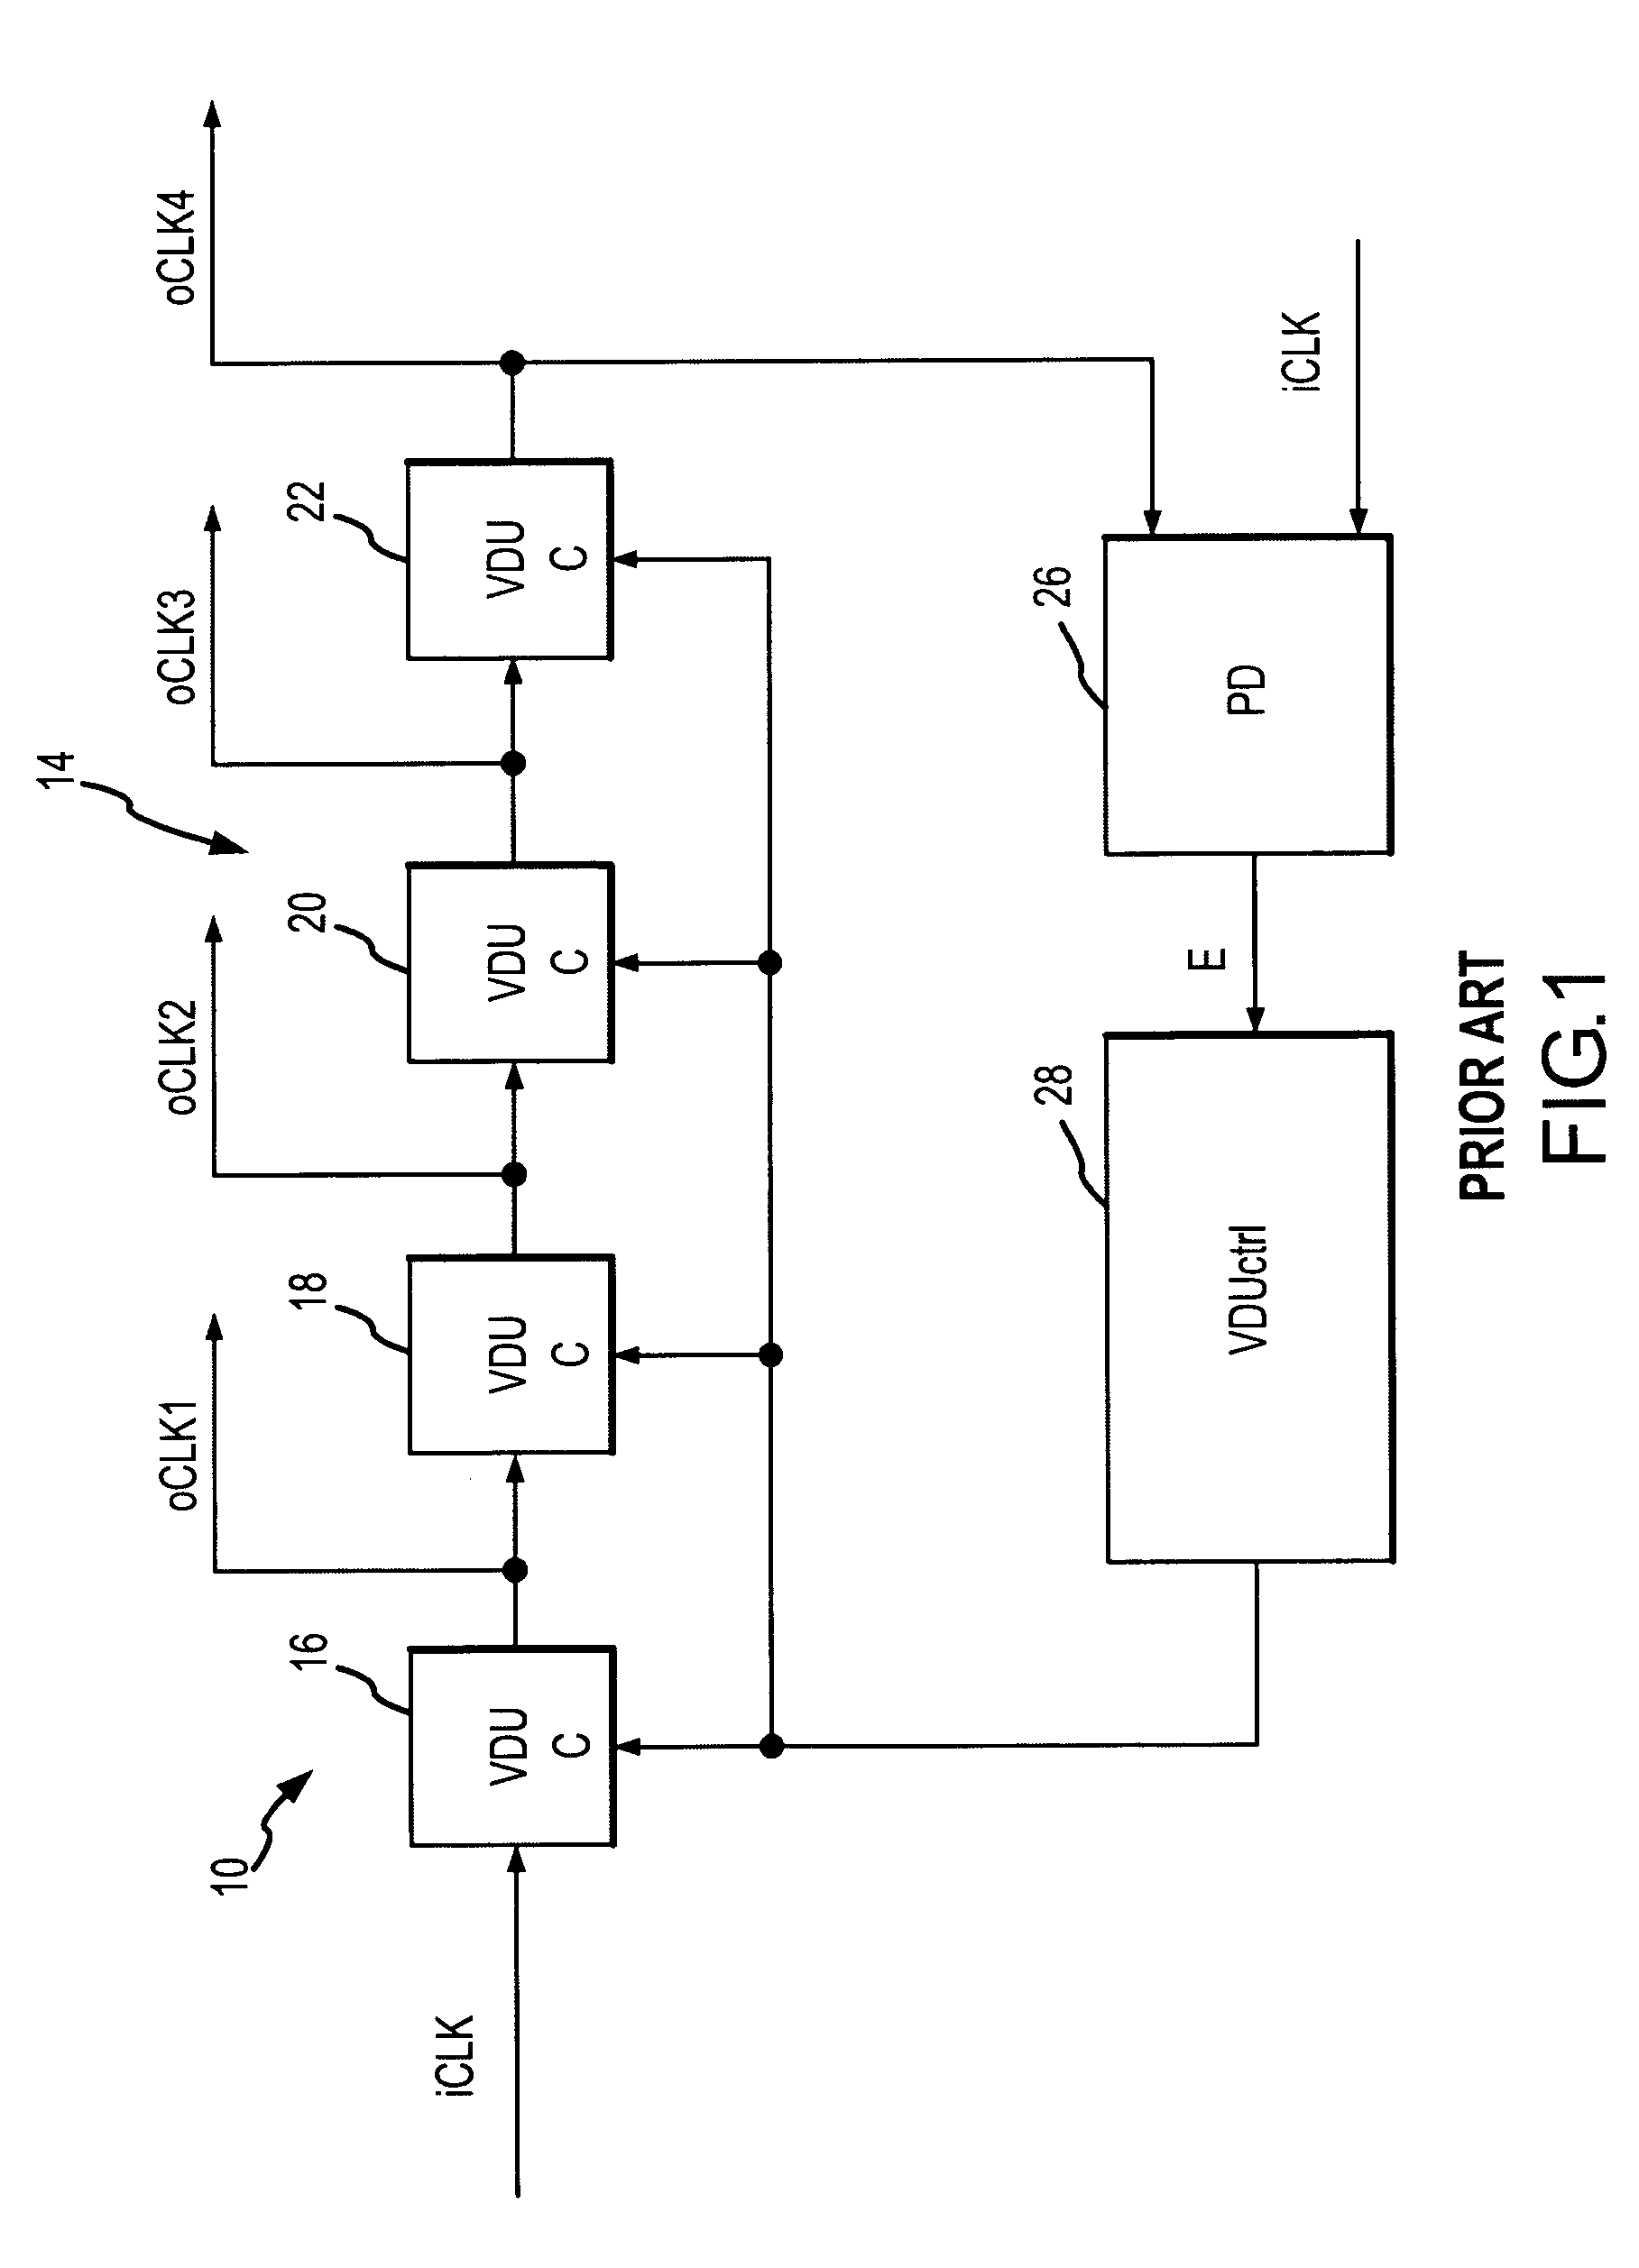 Multi-phase clock signal generator and method having inherently unlimited frequency capability